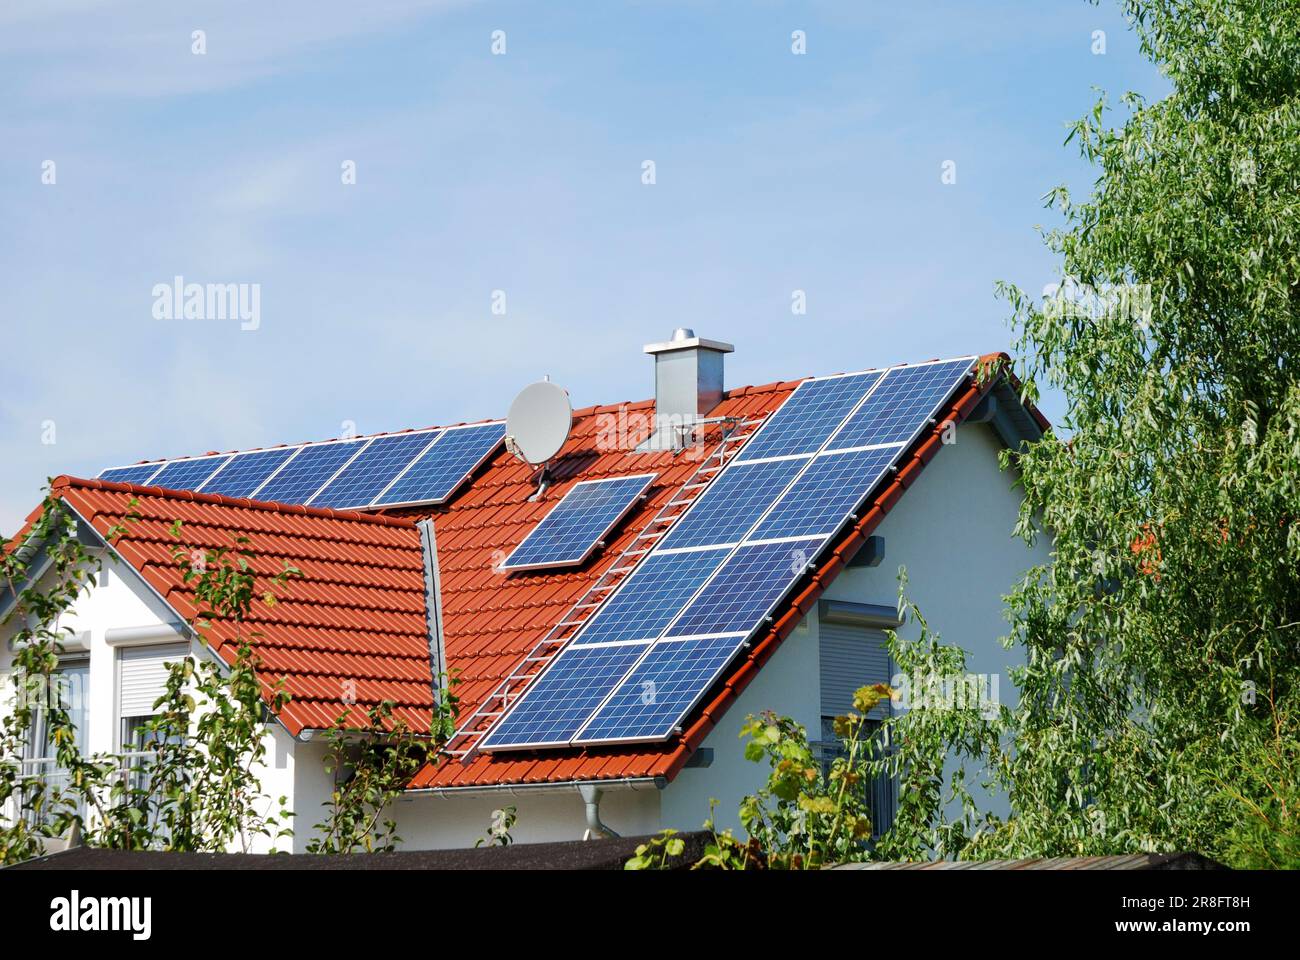 House roor with solar panels Stock Photo